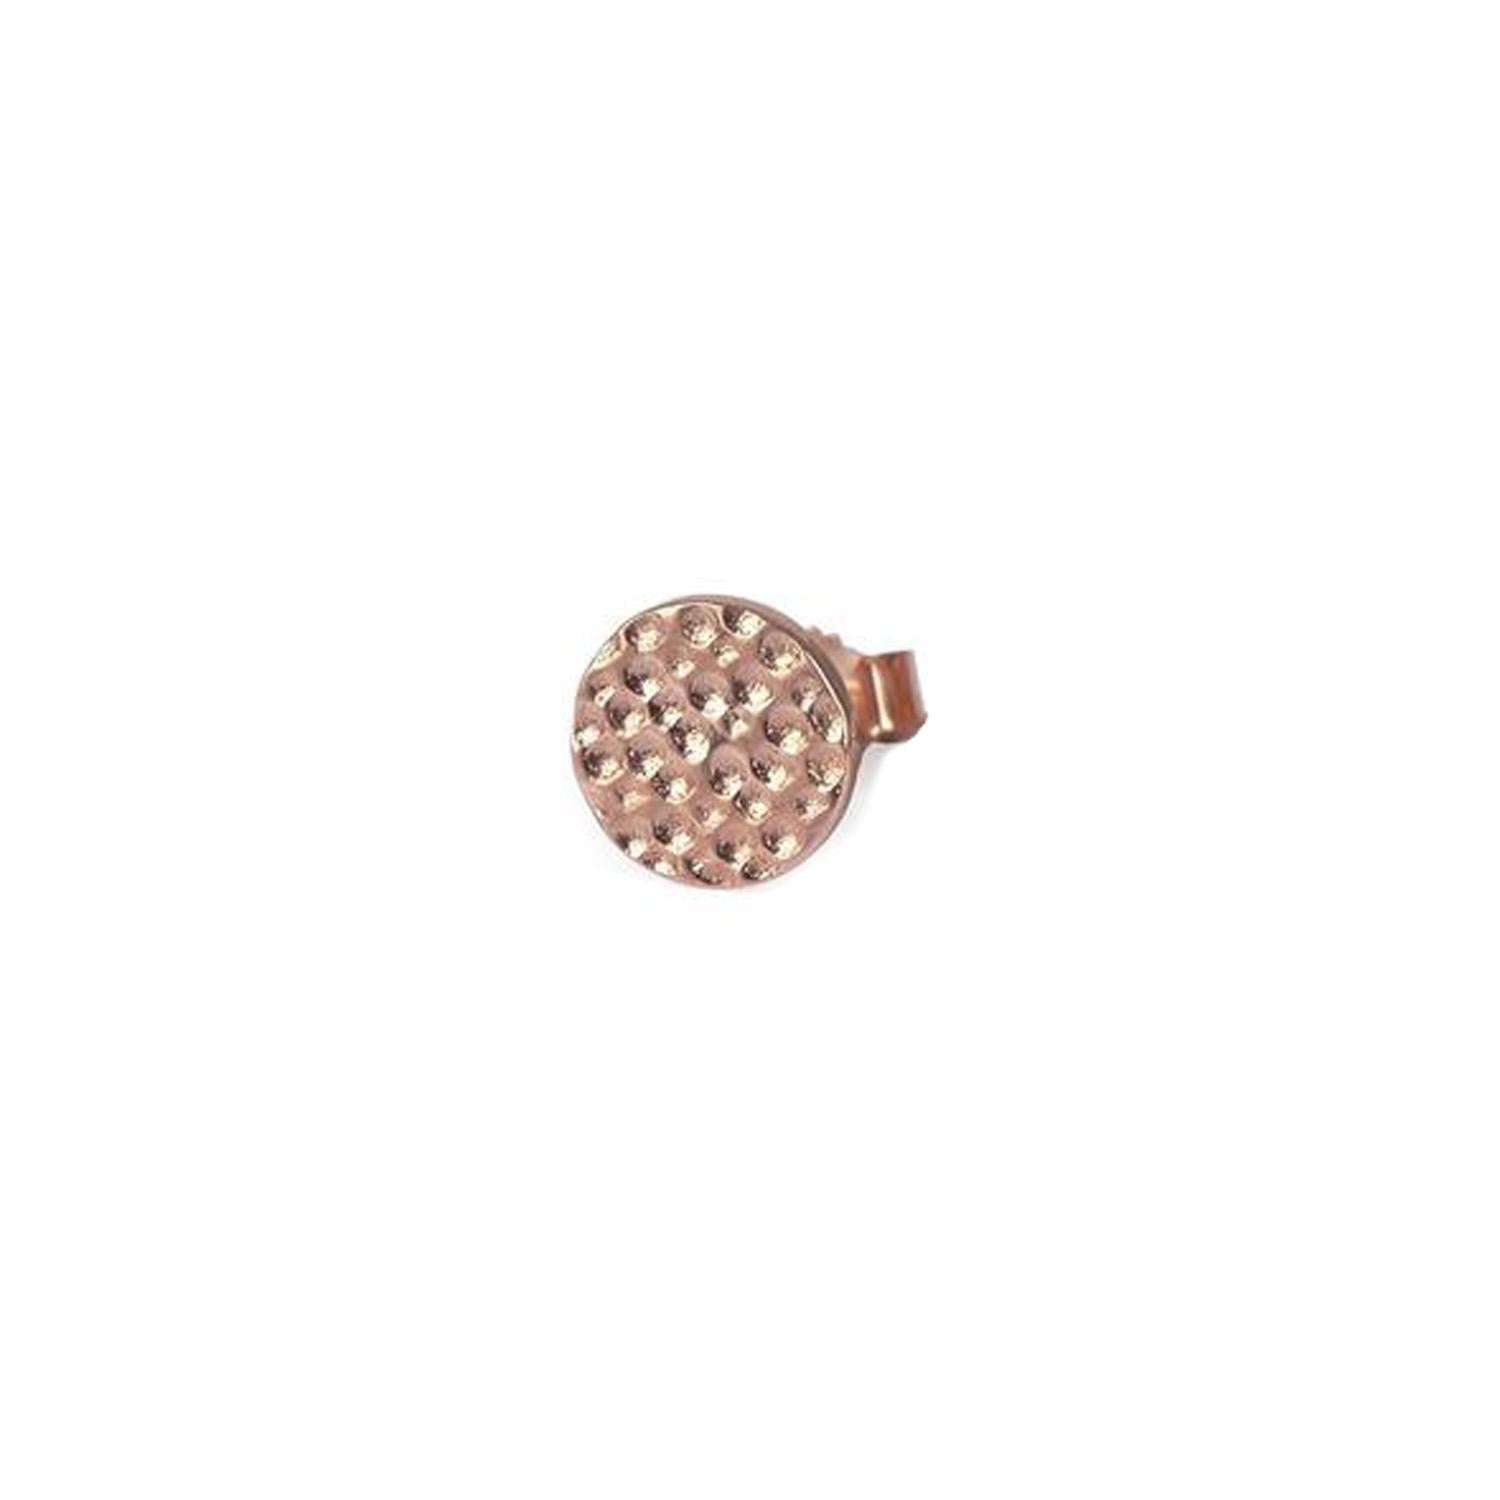 9kt Gold Hammered Disc Stud Earrings